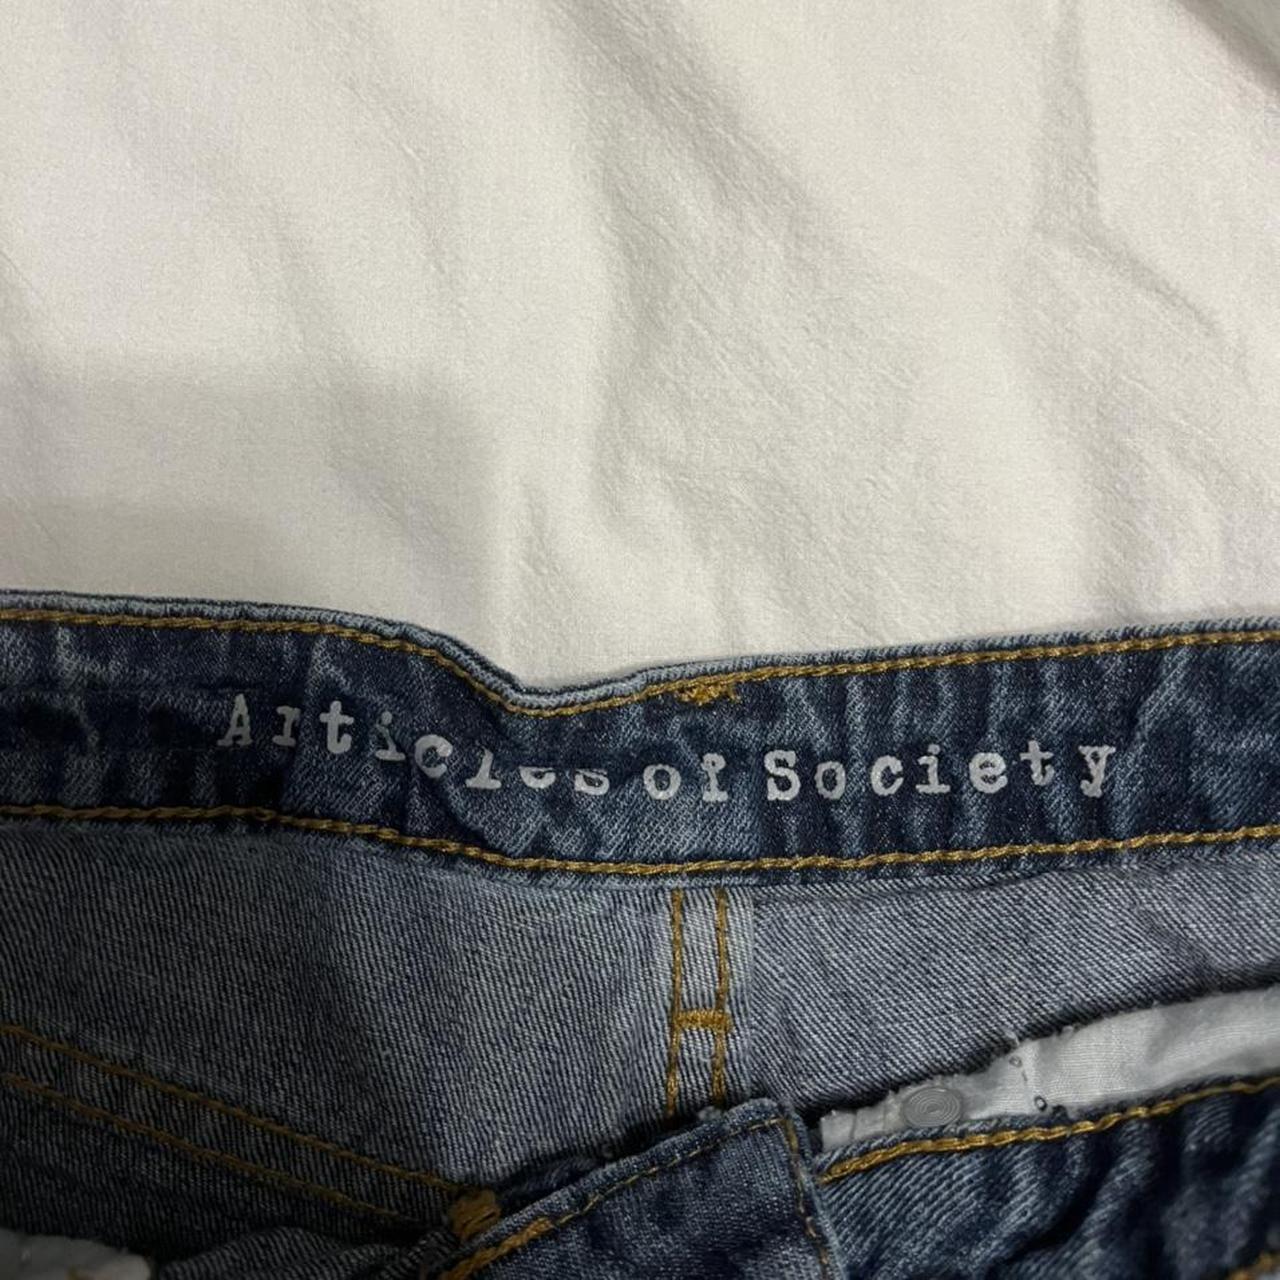 Articles of Society Women's Blue and Navy Shorts (4)